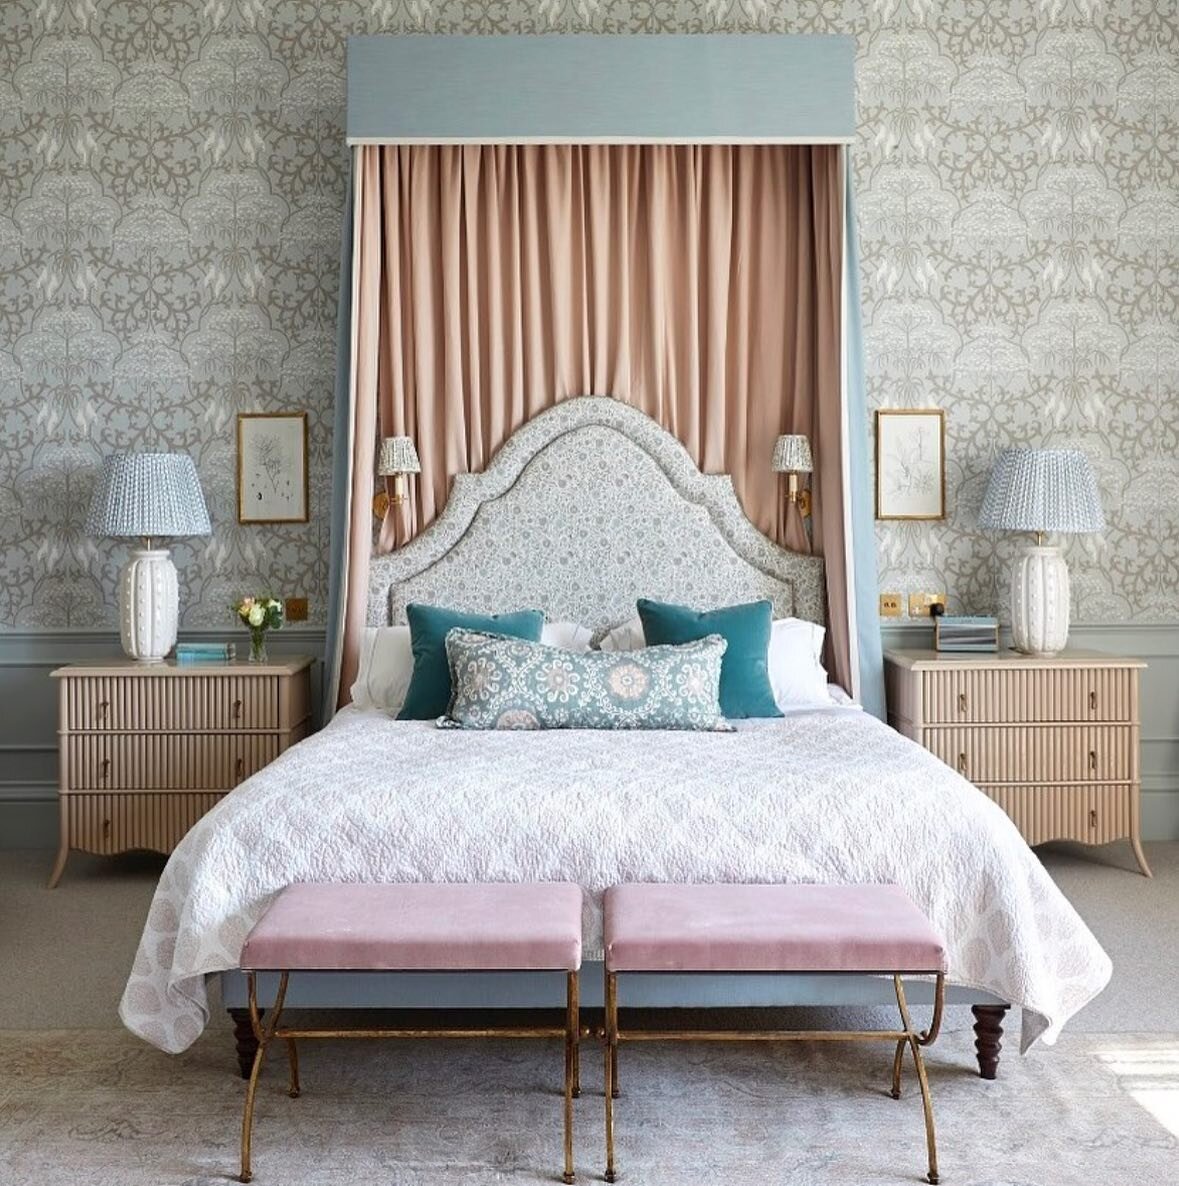 We may have lost an hour, but let&rsquo;s stay in bed 😴 &lsquo;Sunday Saves: Bedroom Edition&rsquo; is up stories.✨ We could spend all day in this beautiful bedroom by This gorgeous space from @johnstonparkeinteriors
&bull;
&bull;
&bull;
&bull;
📸: 